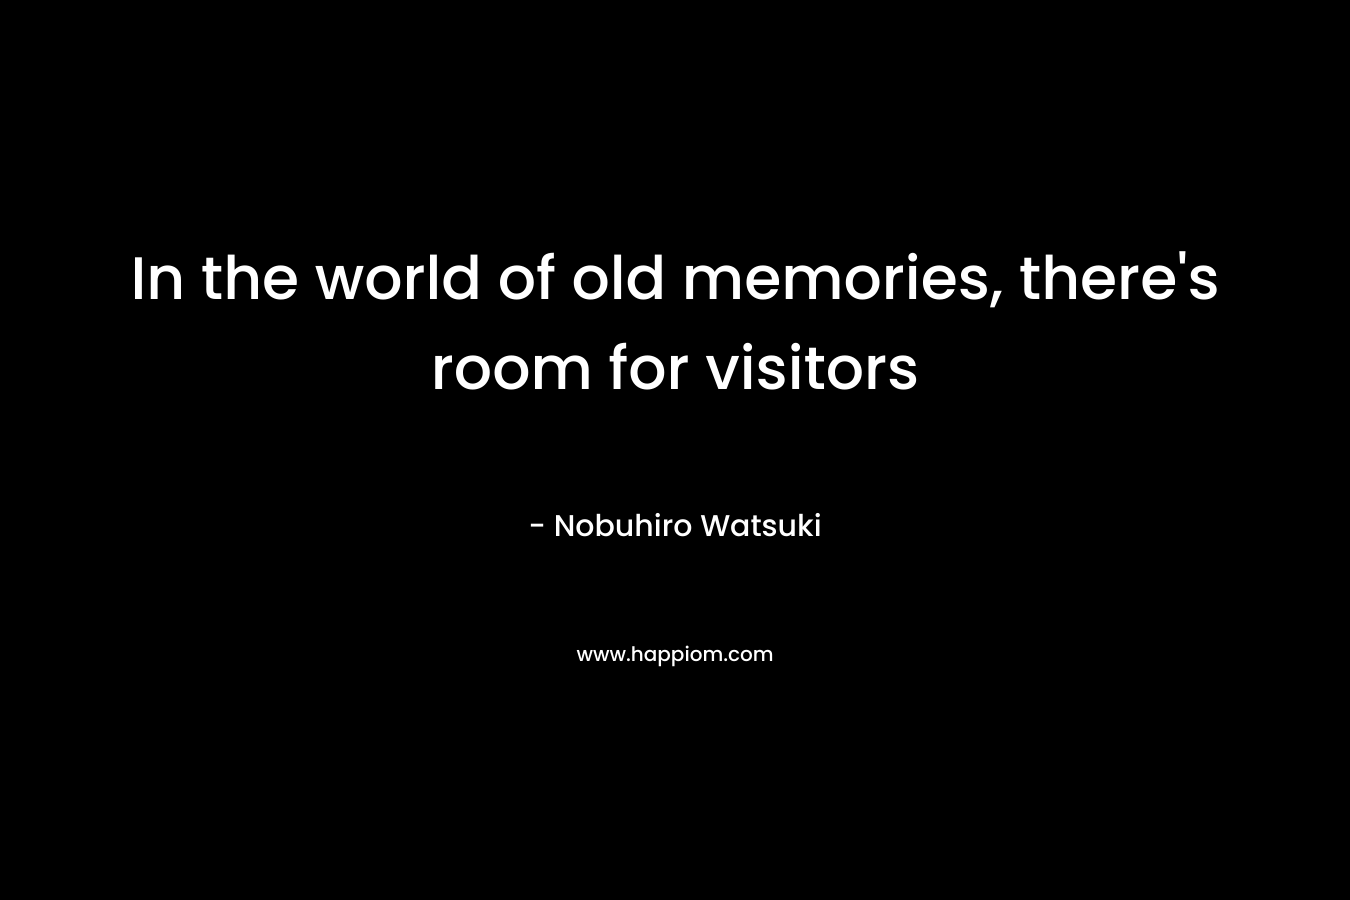 In the world of old memories, there's room for visitors